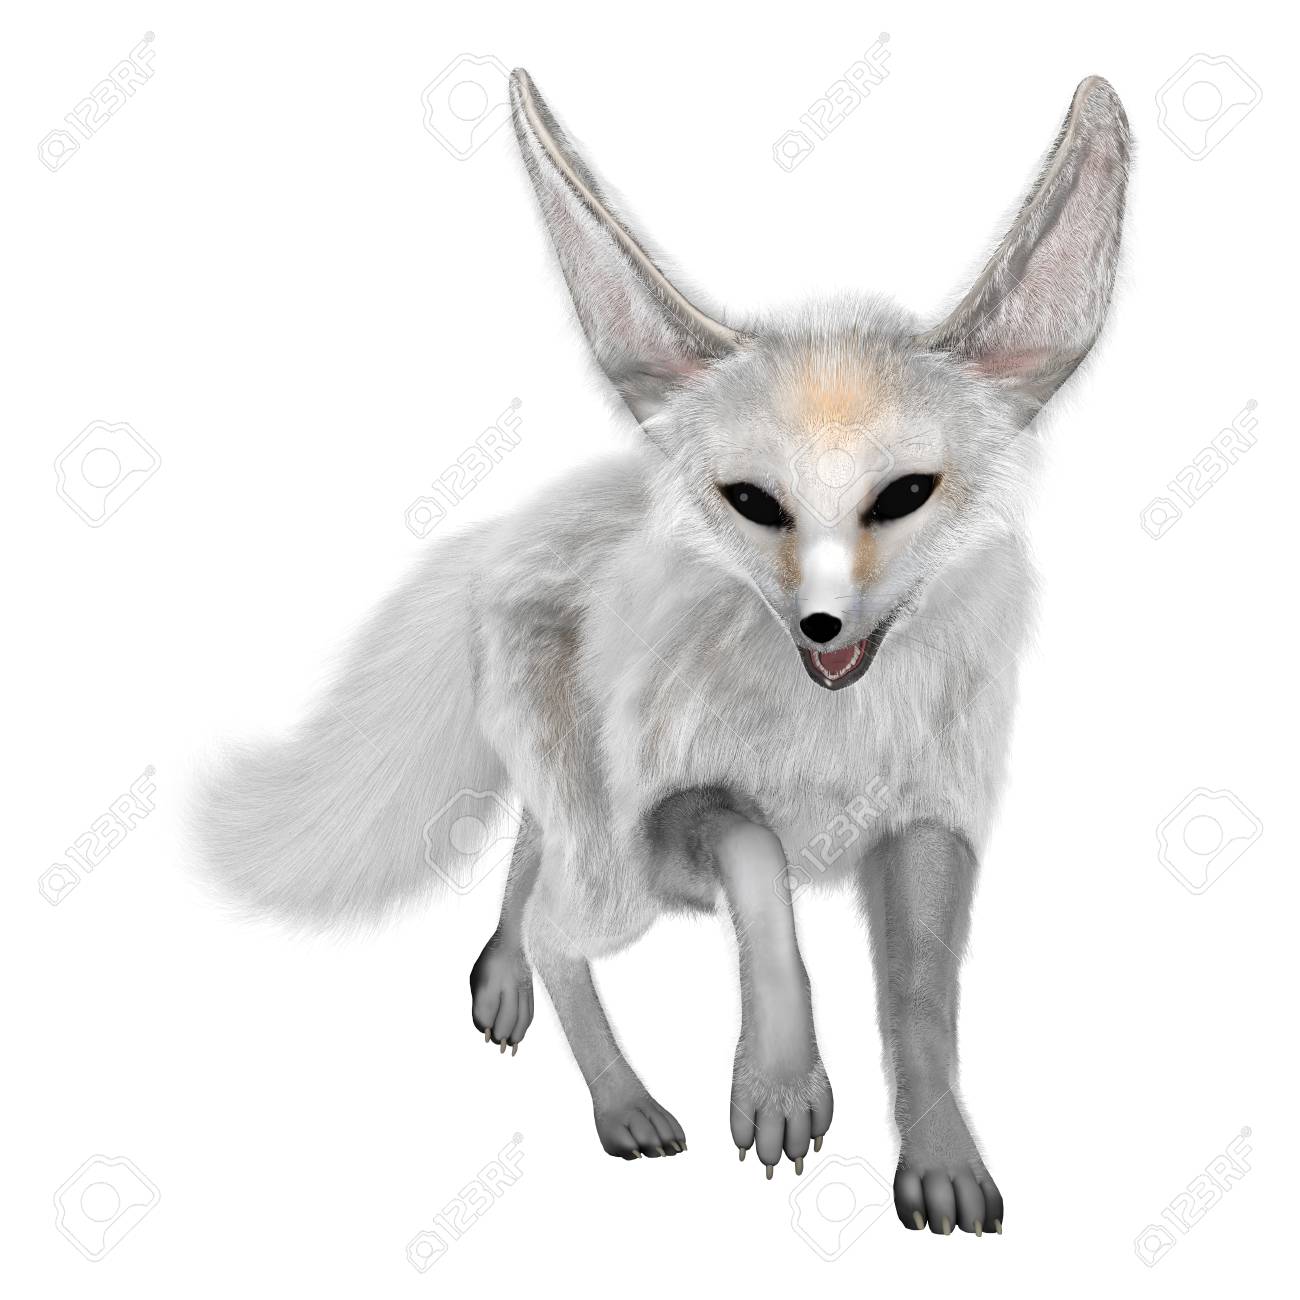 3d Rendering Of A Fennec Fox Isolated On White Background Stock